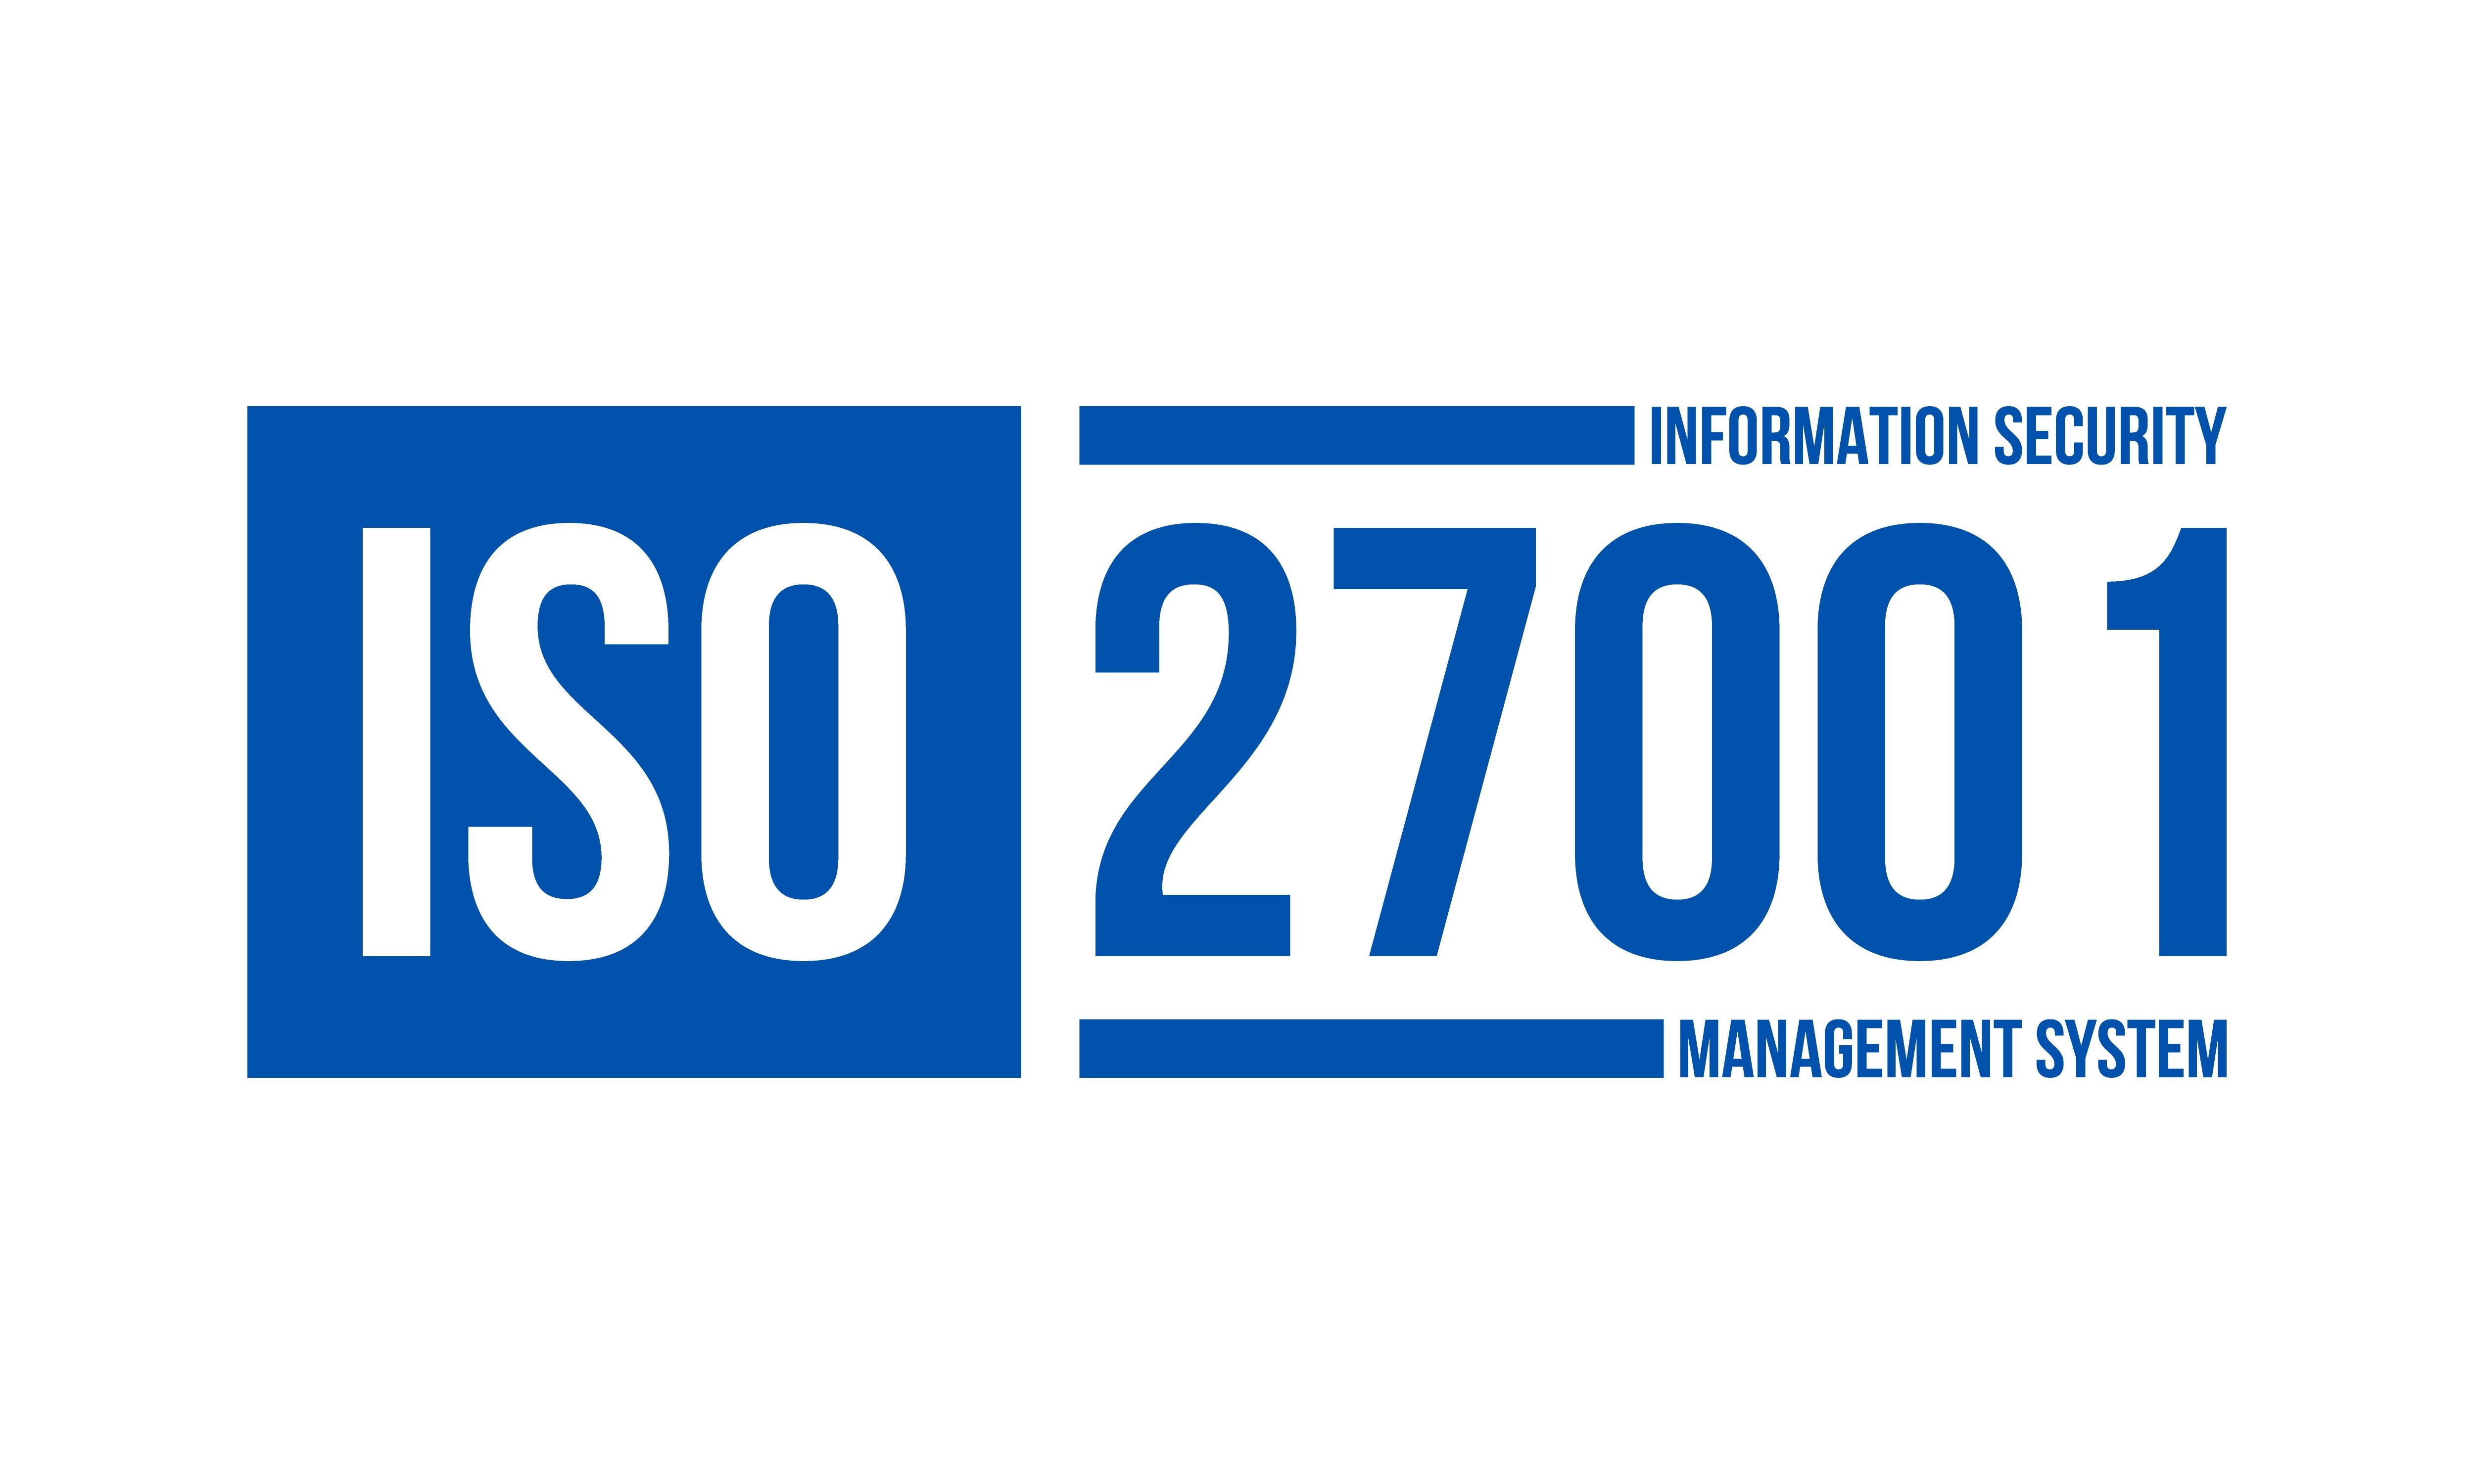 ISO27001 Certification